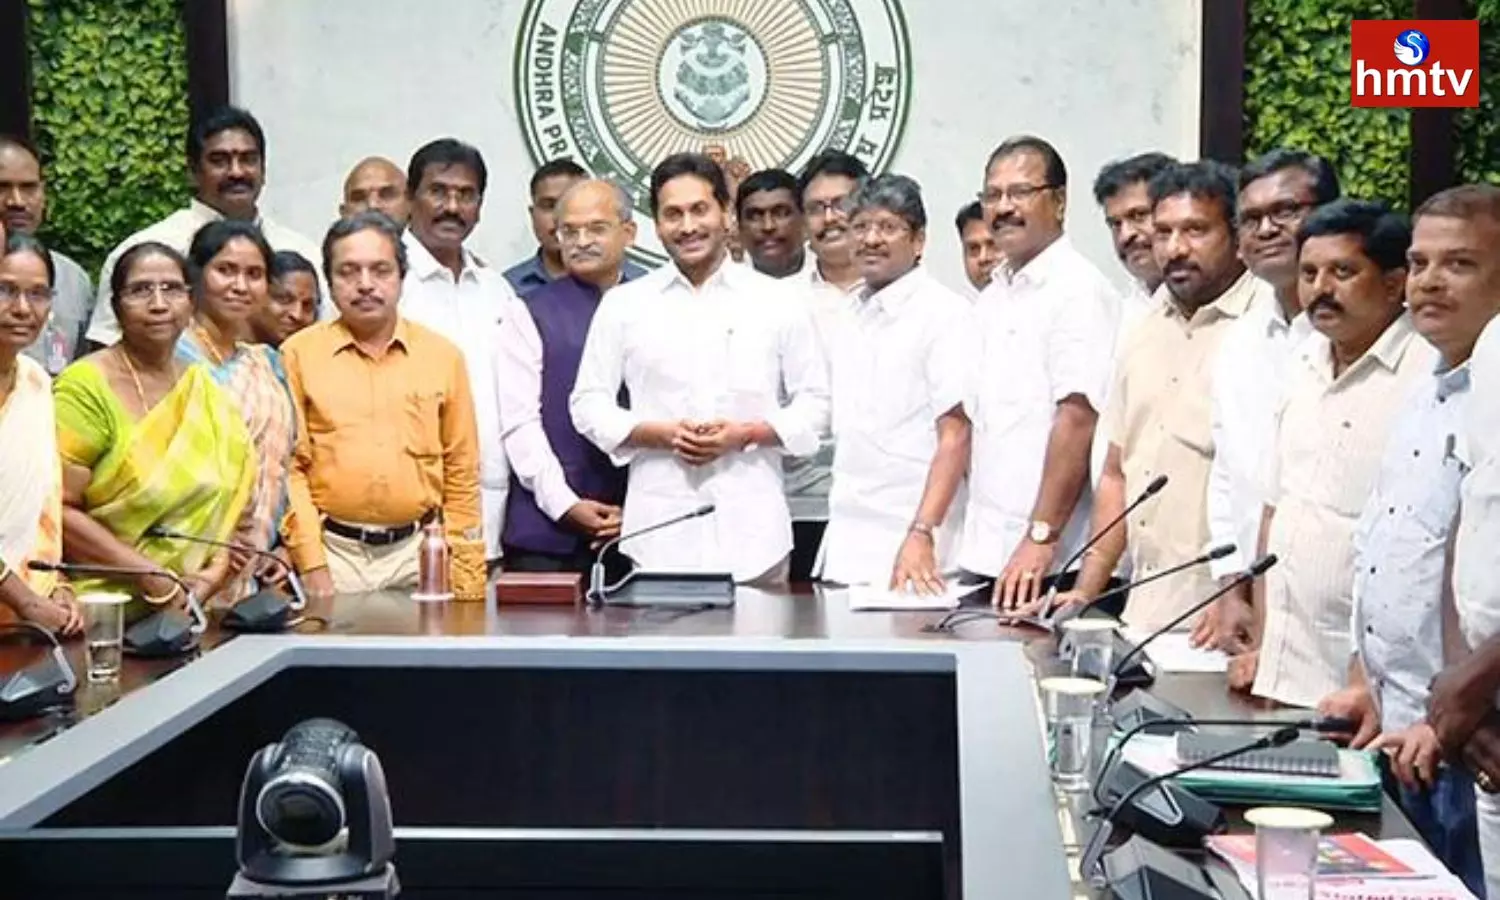 Contract Employees Tell Thanks To Cm Jagan